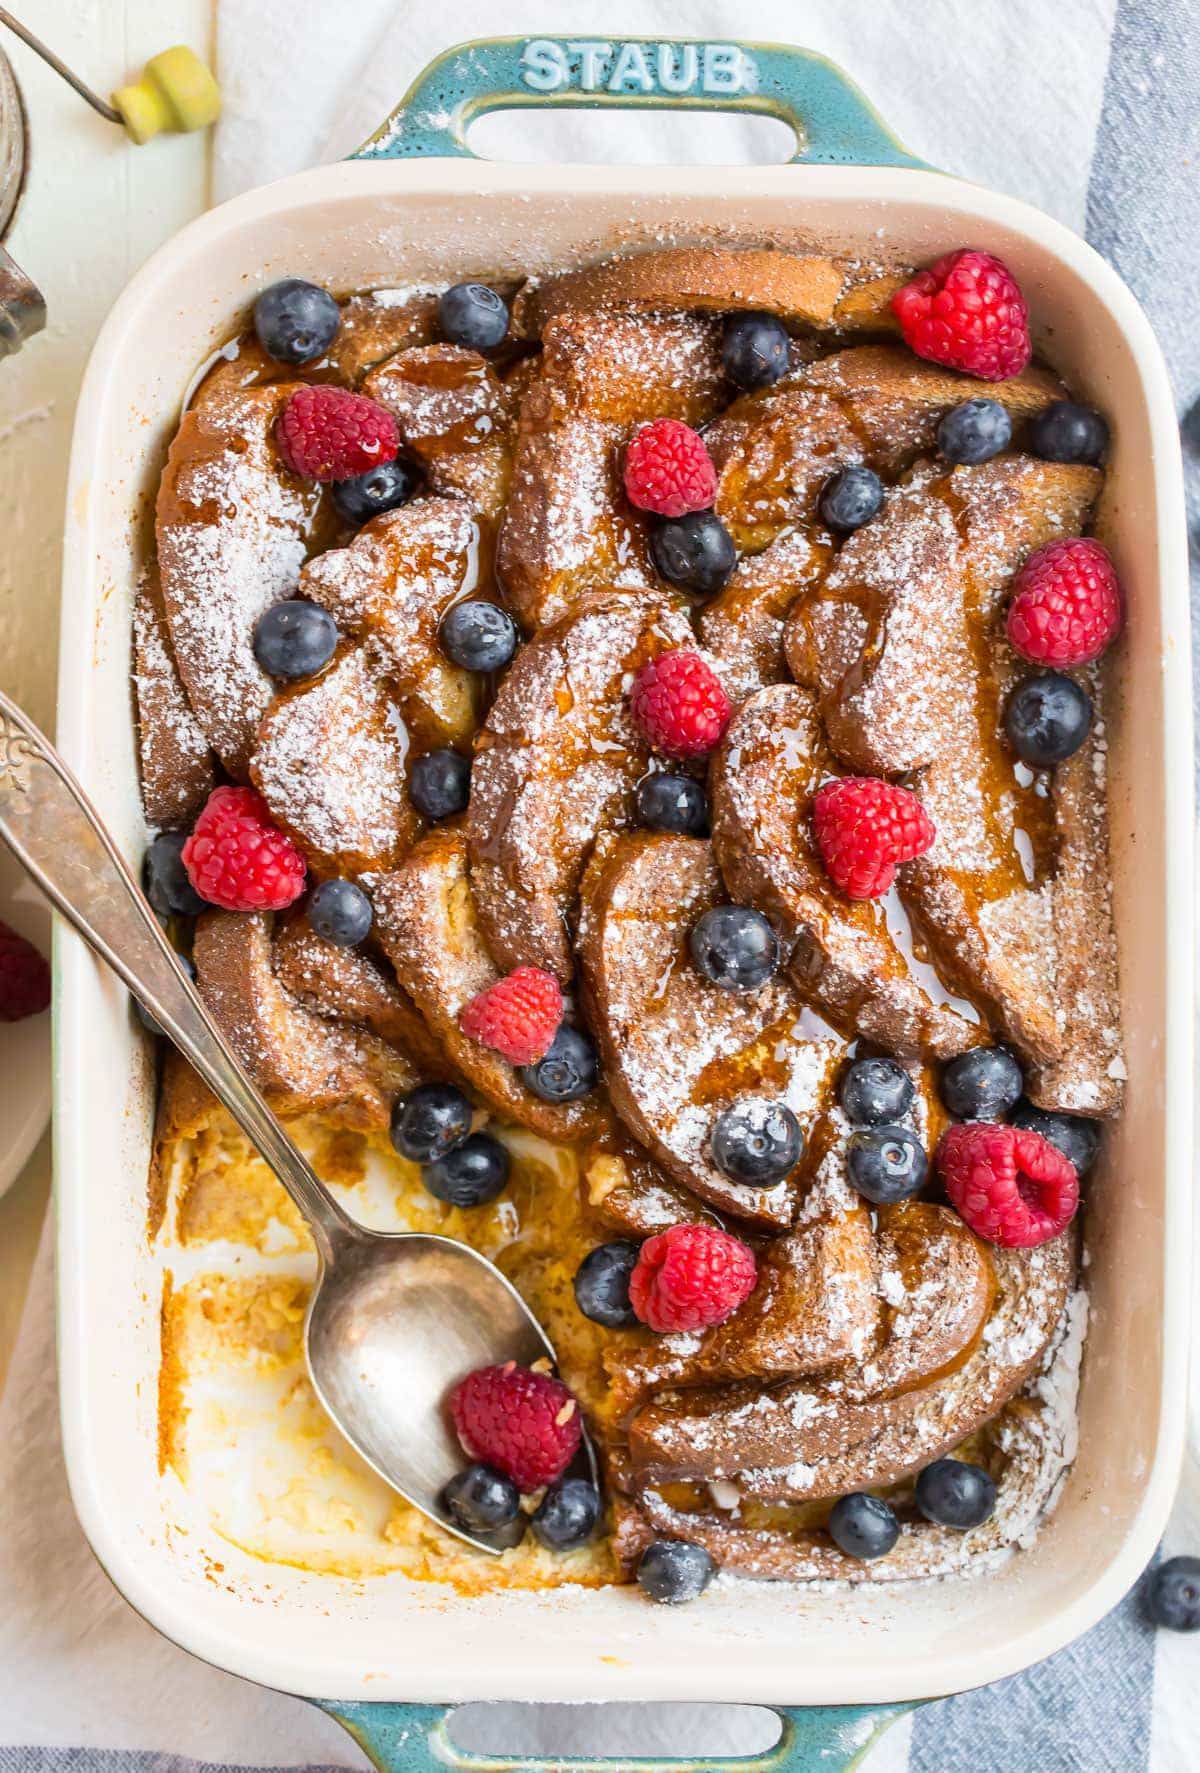 Overnight French Toast: A Hassle-Free Morning Treat